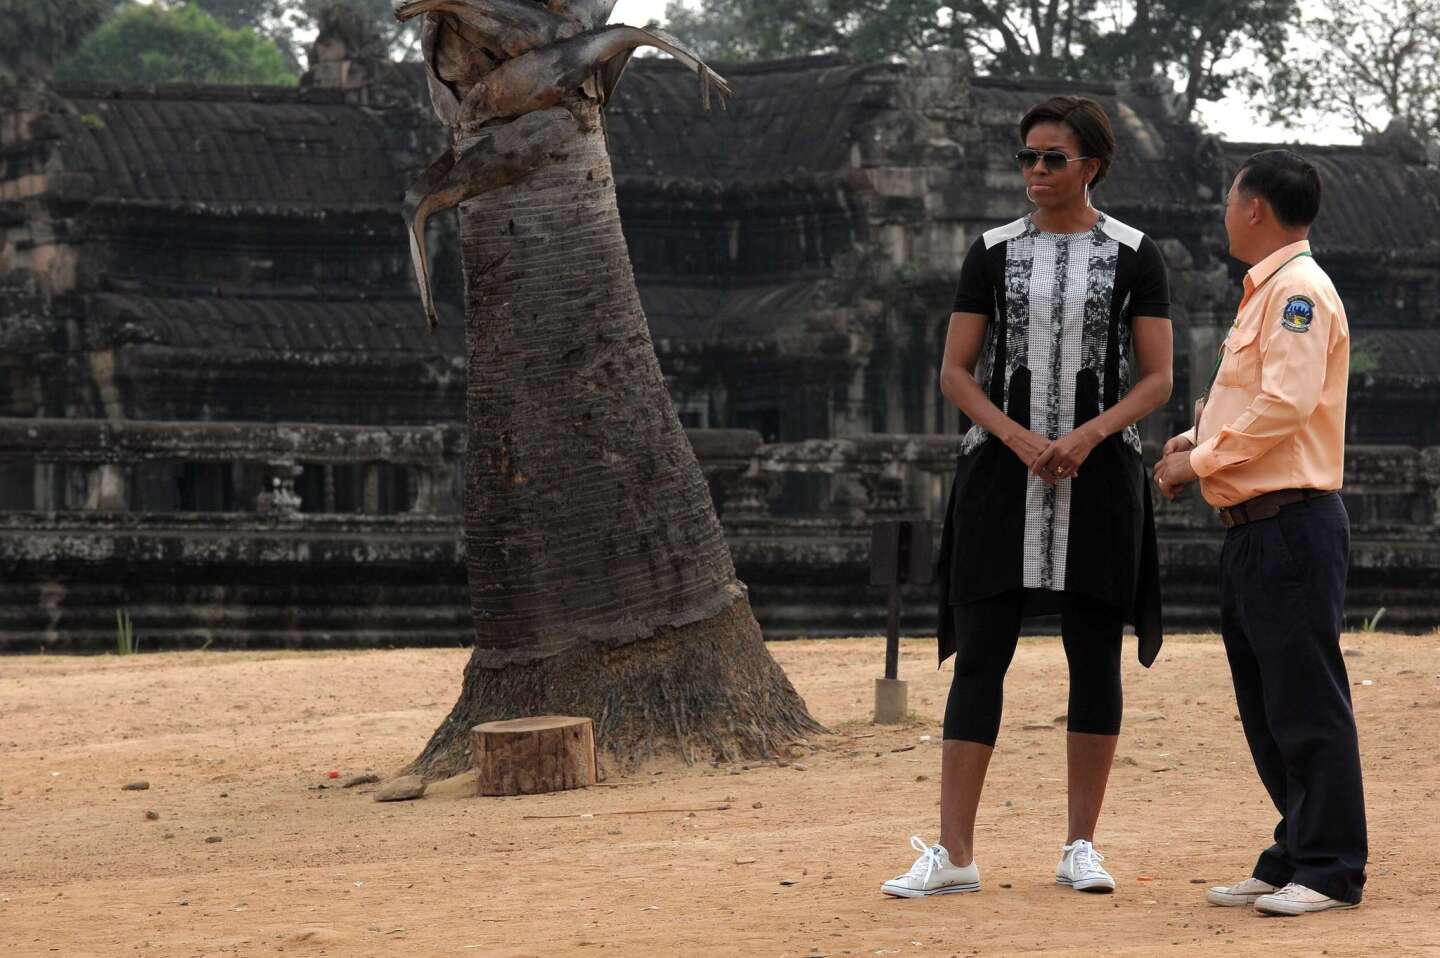 Michelle Obama listens to a Cambodian guide during her visit to Angkor Wat temple in Siem Reap province in Cambodia.